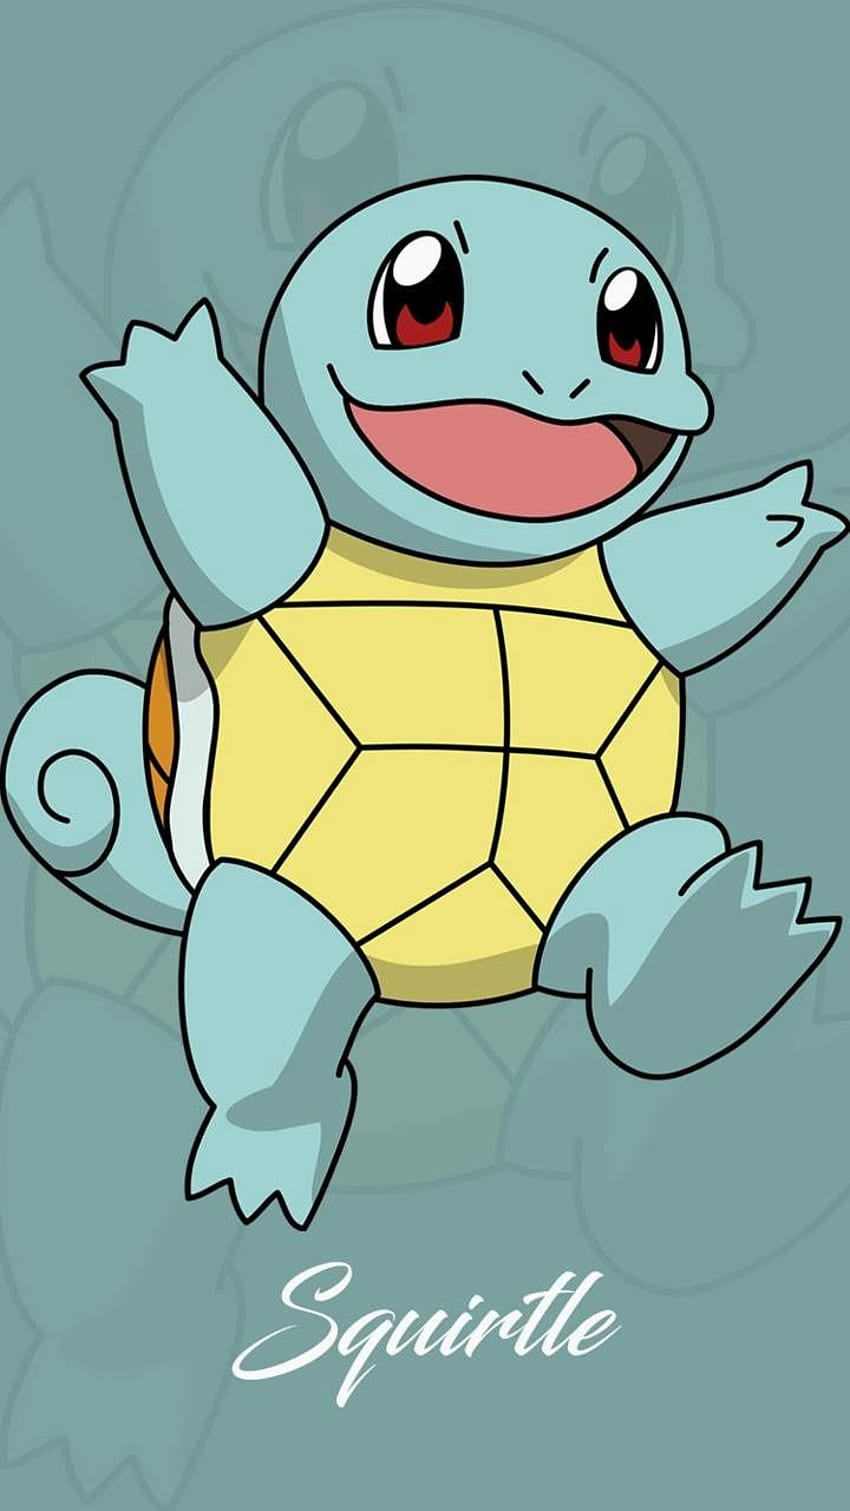 Squirtle - Pokemon Squirtle -, Squirtle Squad HD тапет за телефон